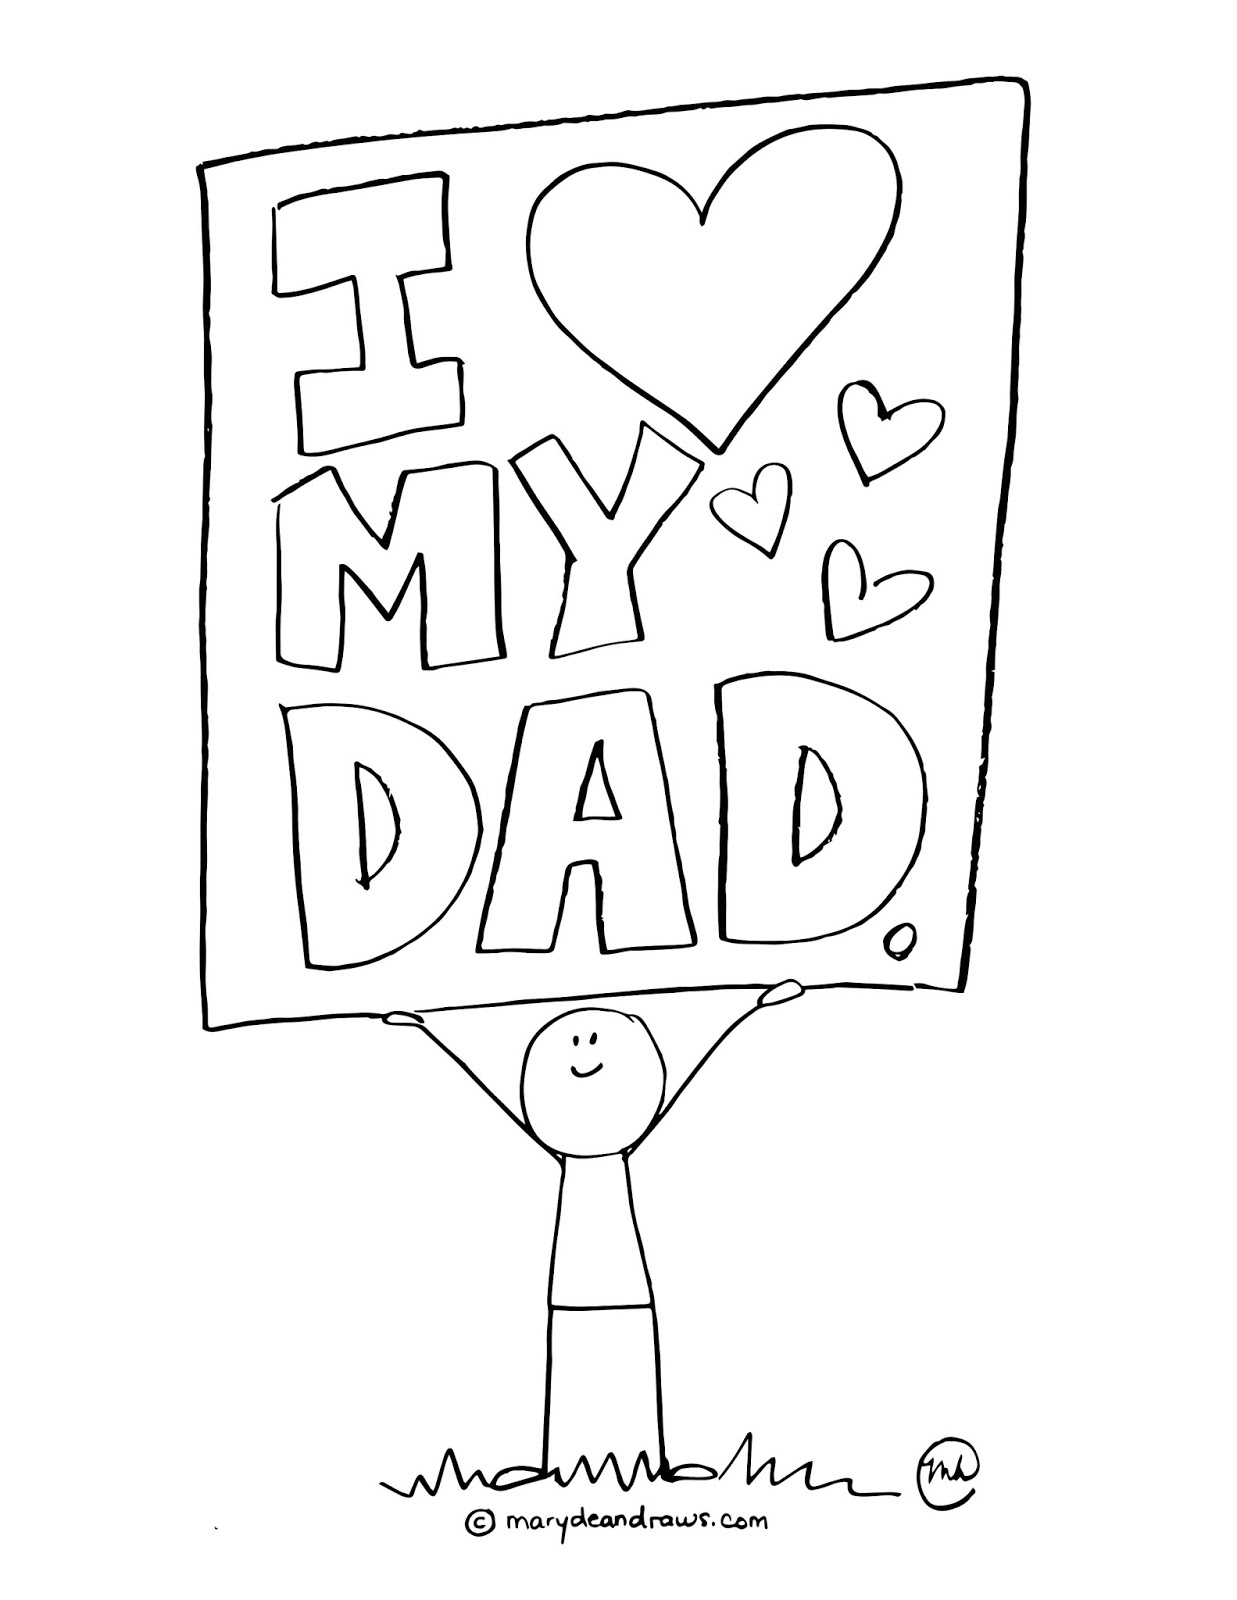 a father’s day printable coloring page!